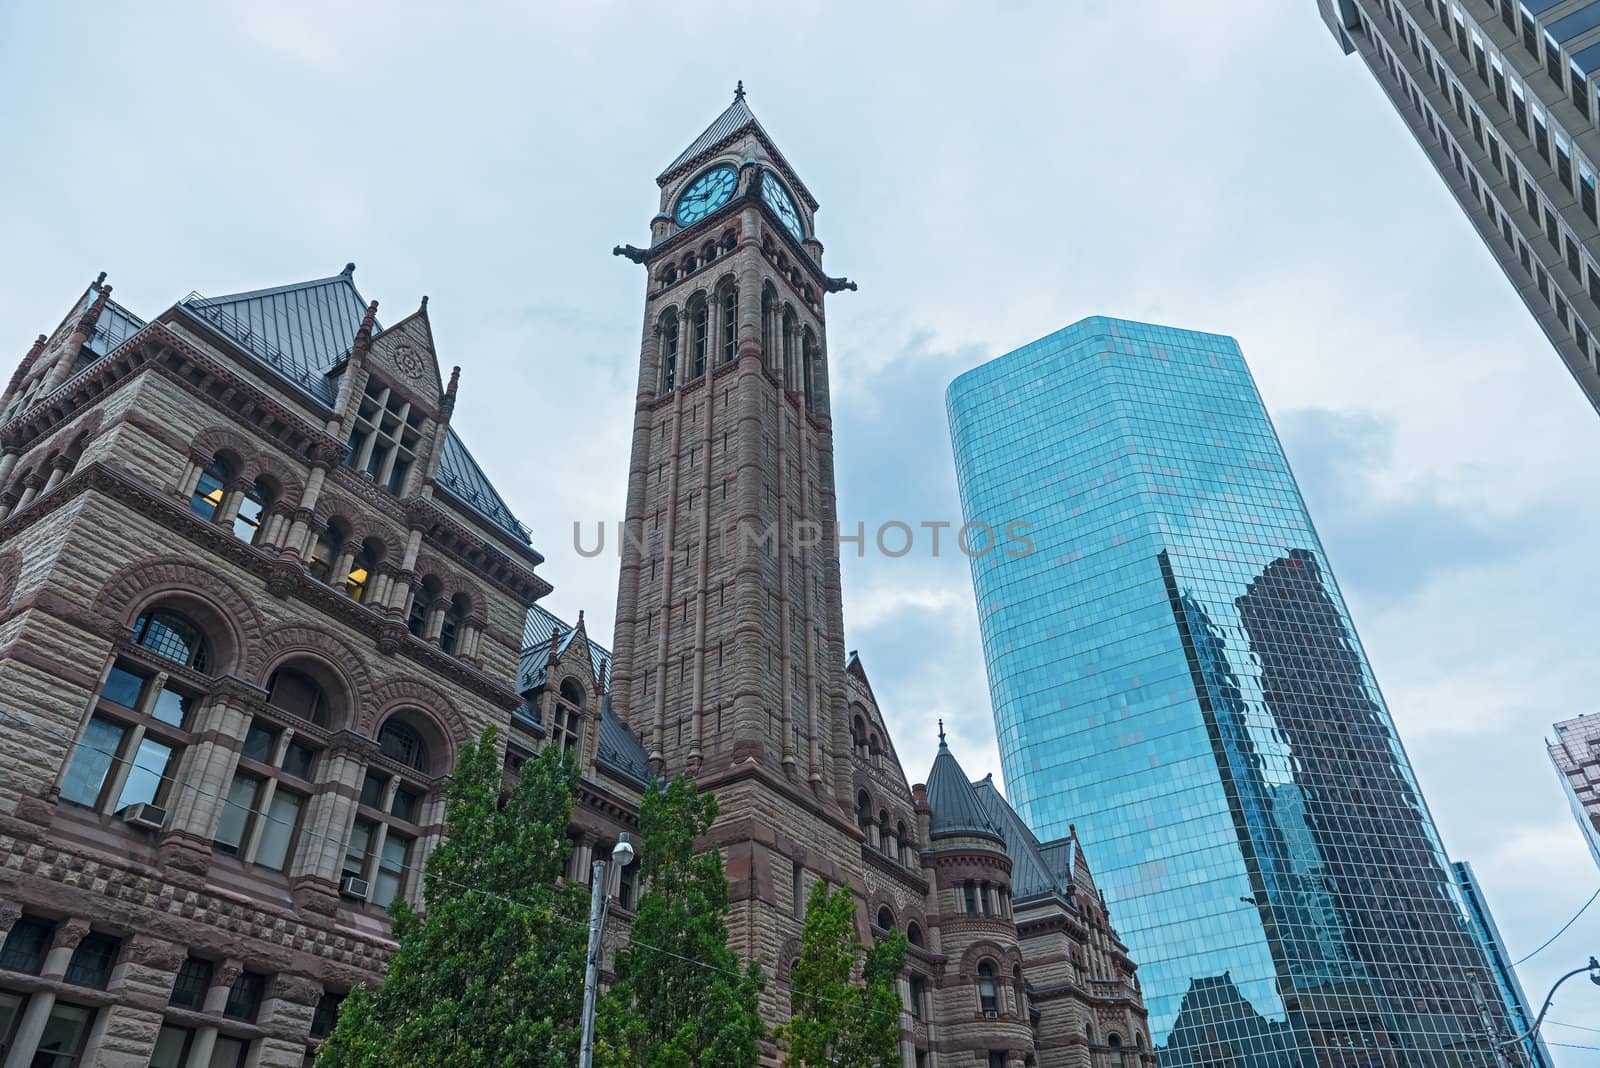 Toronto old city hall by Marcus